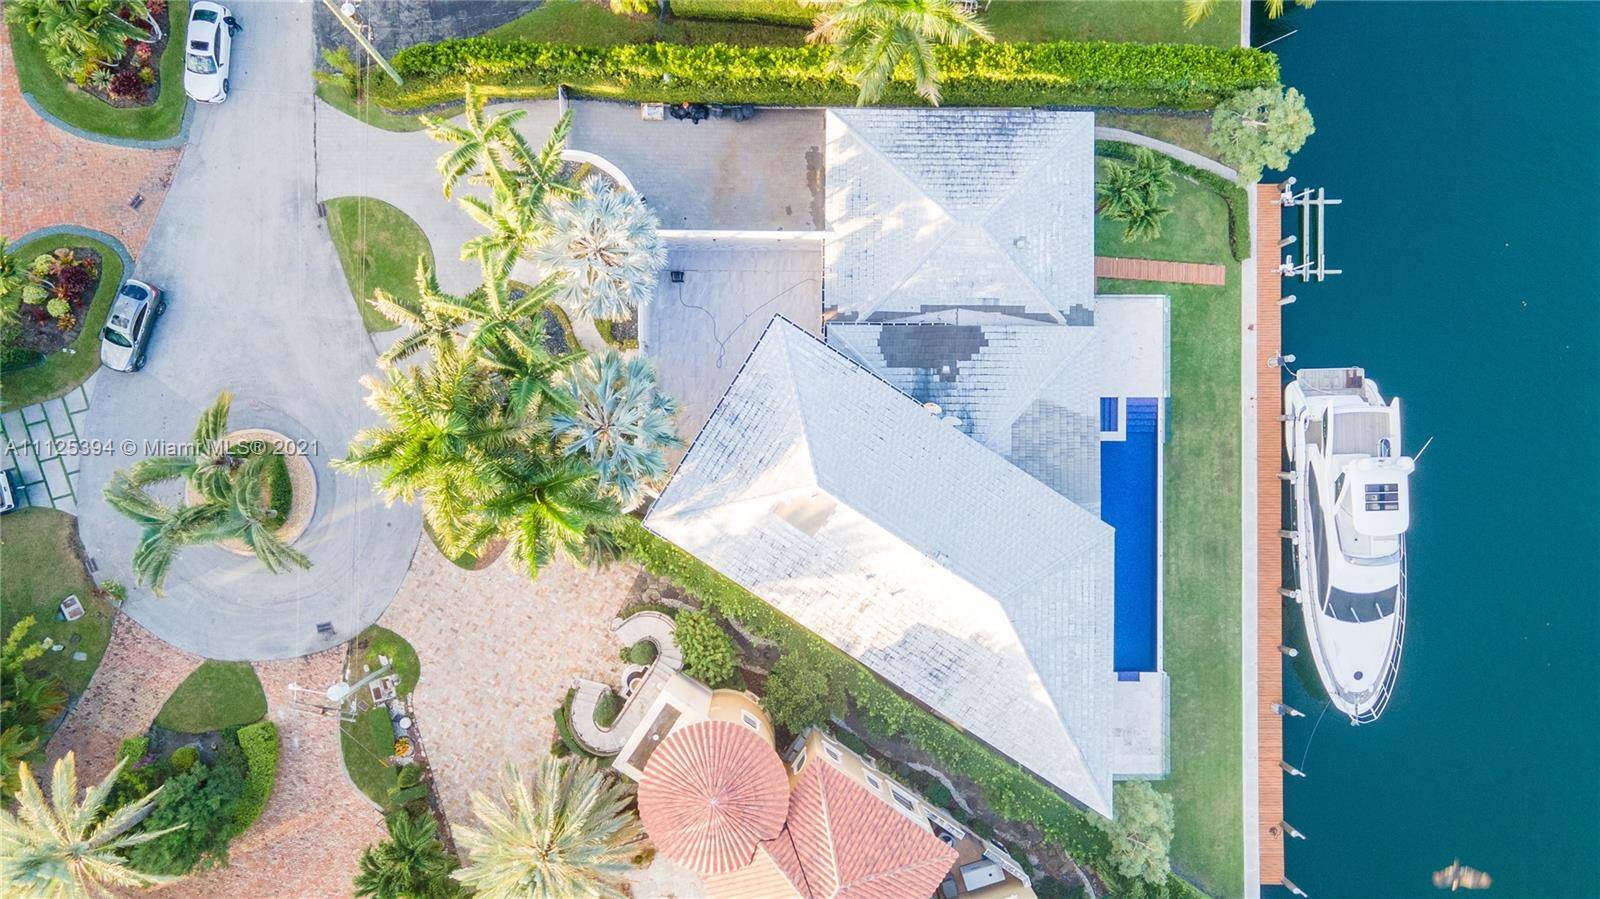 Located at the end of a cul de sac in the gated community of Sunrise Harbor, 6921 Sunrise Place is unquestionably one of the most exciting waterfront properties in South ...